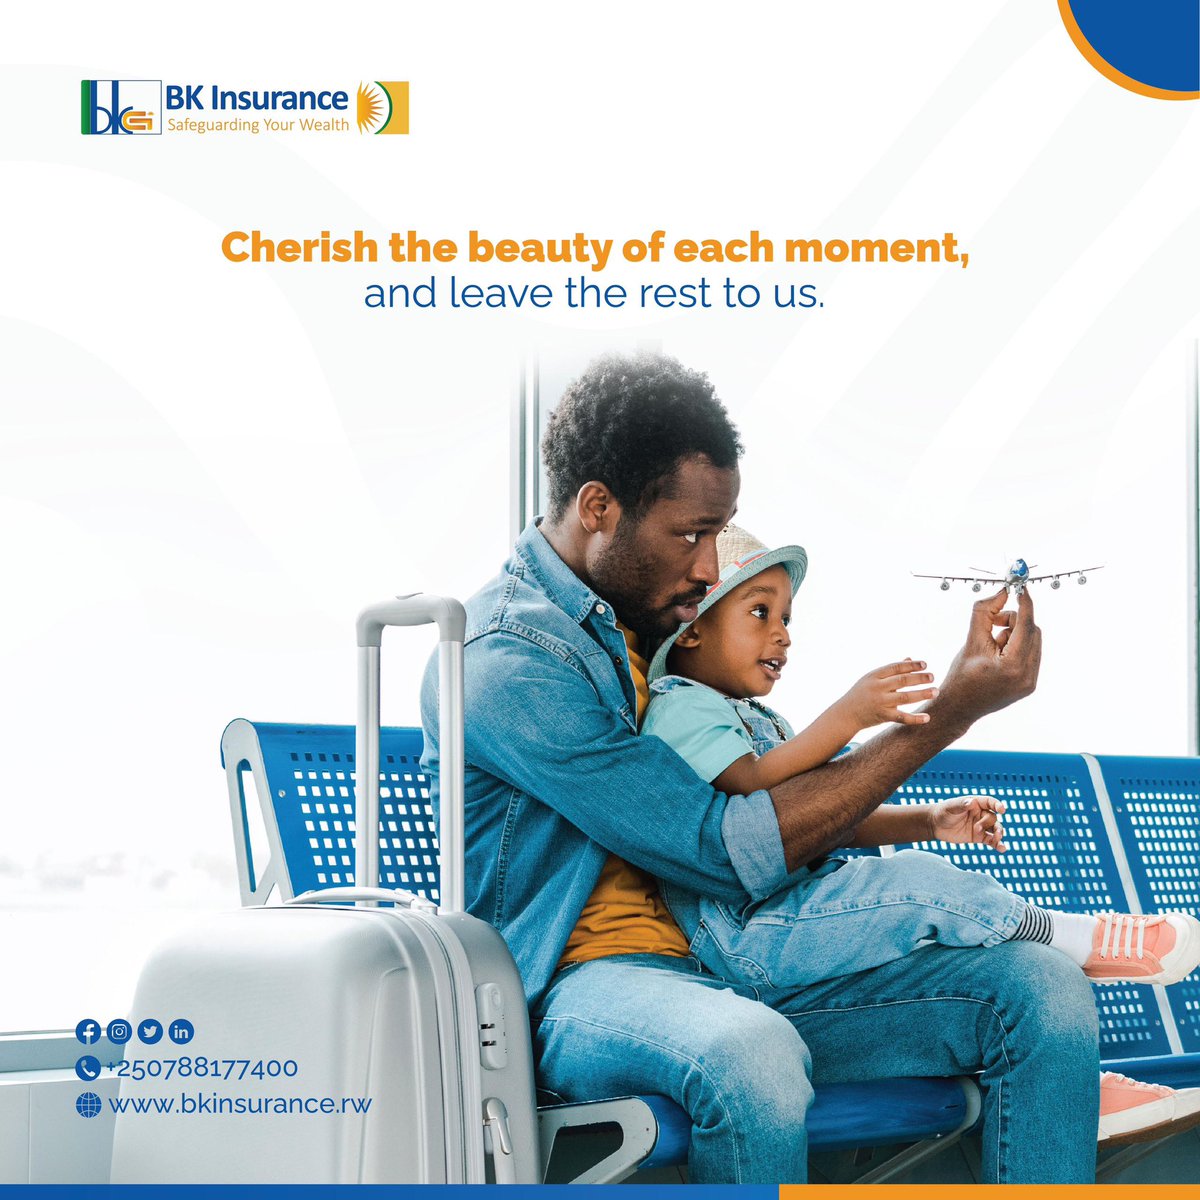 Traveling should be an adventure filled with joy, but life can throw unexpected curveballs. Let BK Insurance’s travel insurance be your safety net, ensuring those unforeseen moments don't derail your journey. #BKInsurance #SafeGuardingYourWealth #RwoX #Rwot